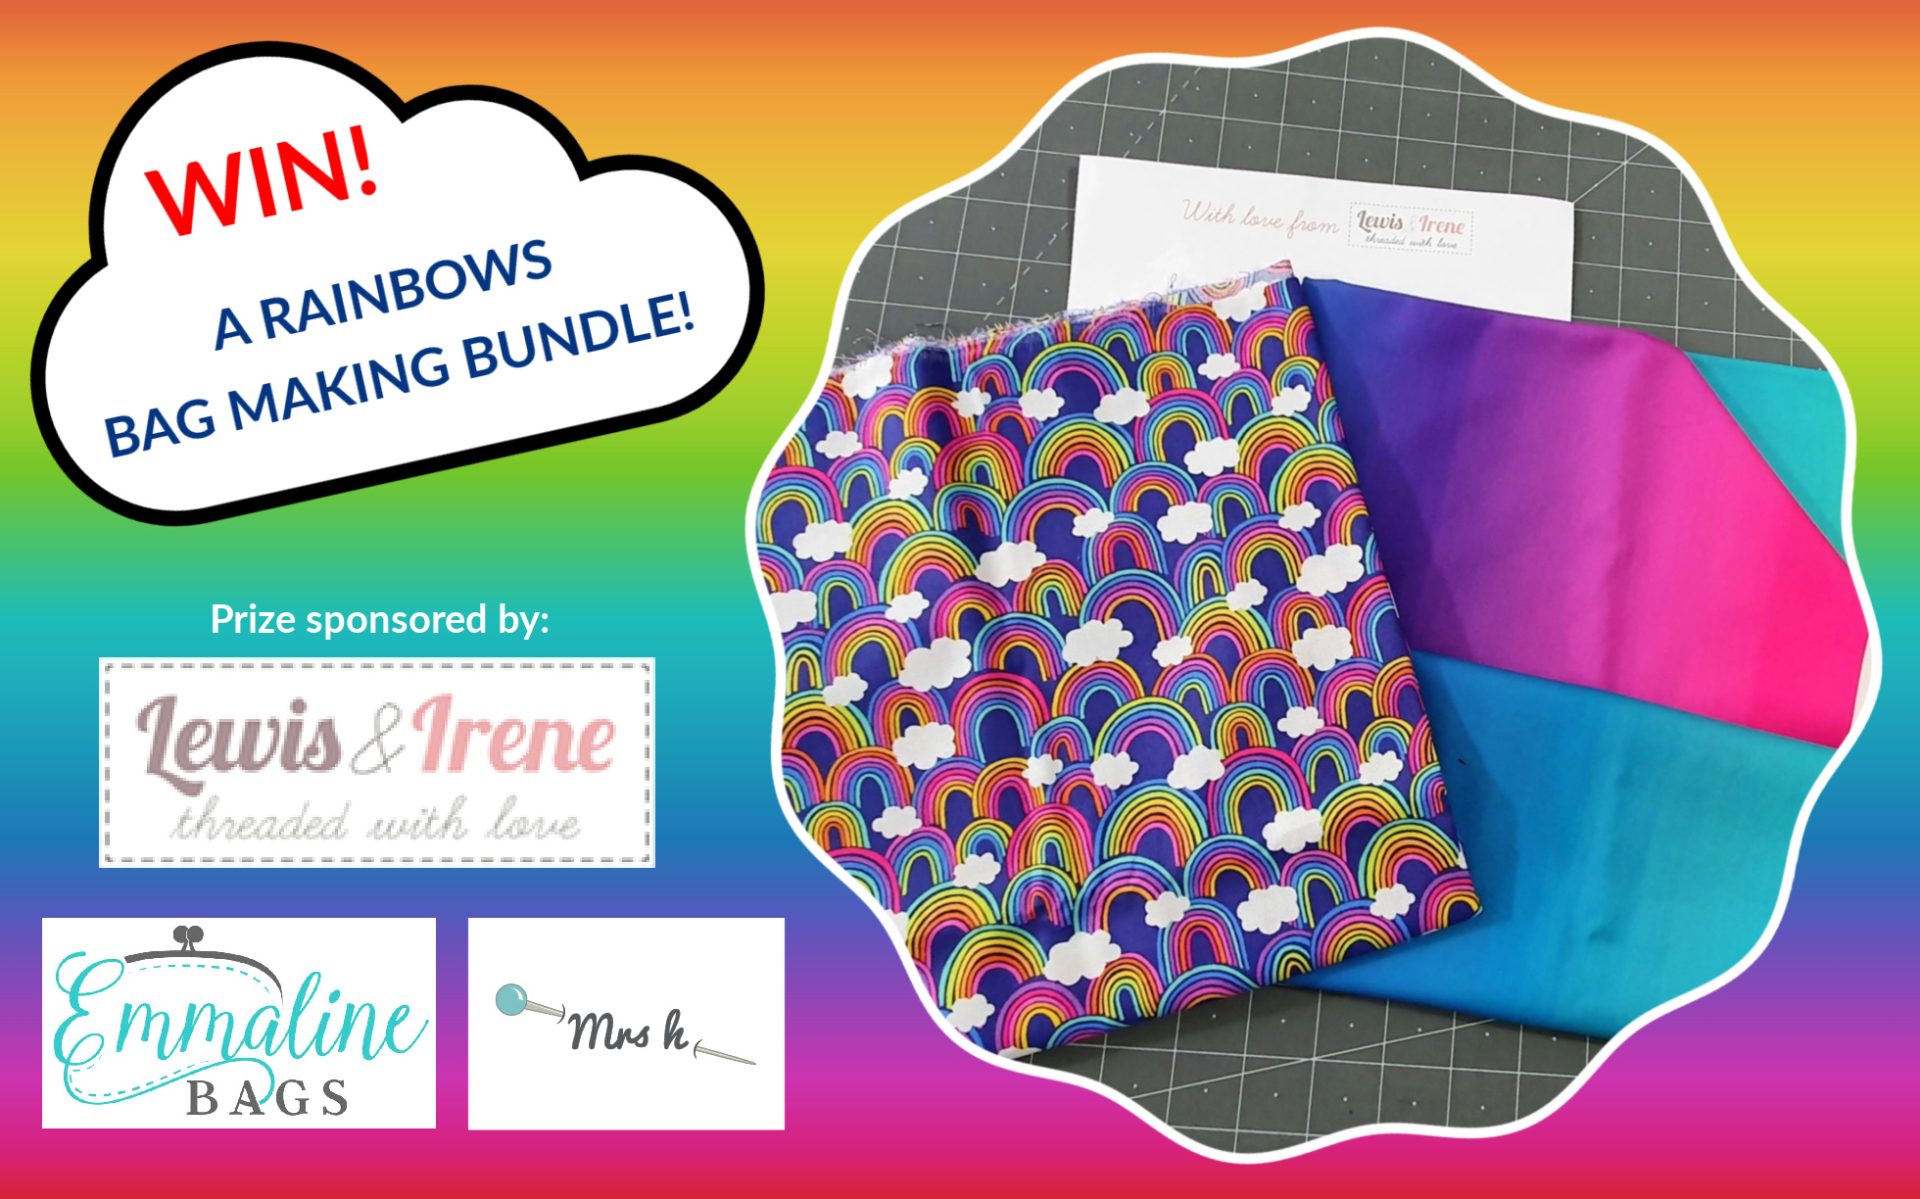 Win Rainbows fabric from Lewis & Irene, patterns from Junyuan 
, and hardware from Emmaline Bags